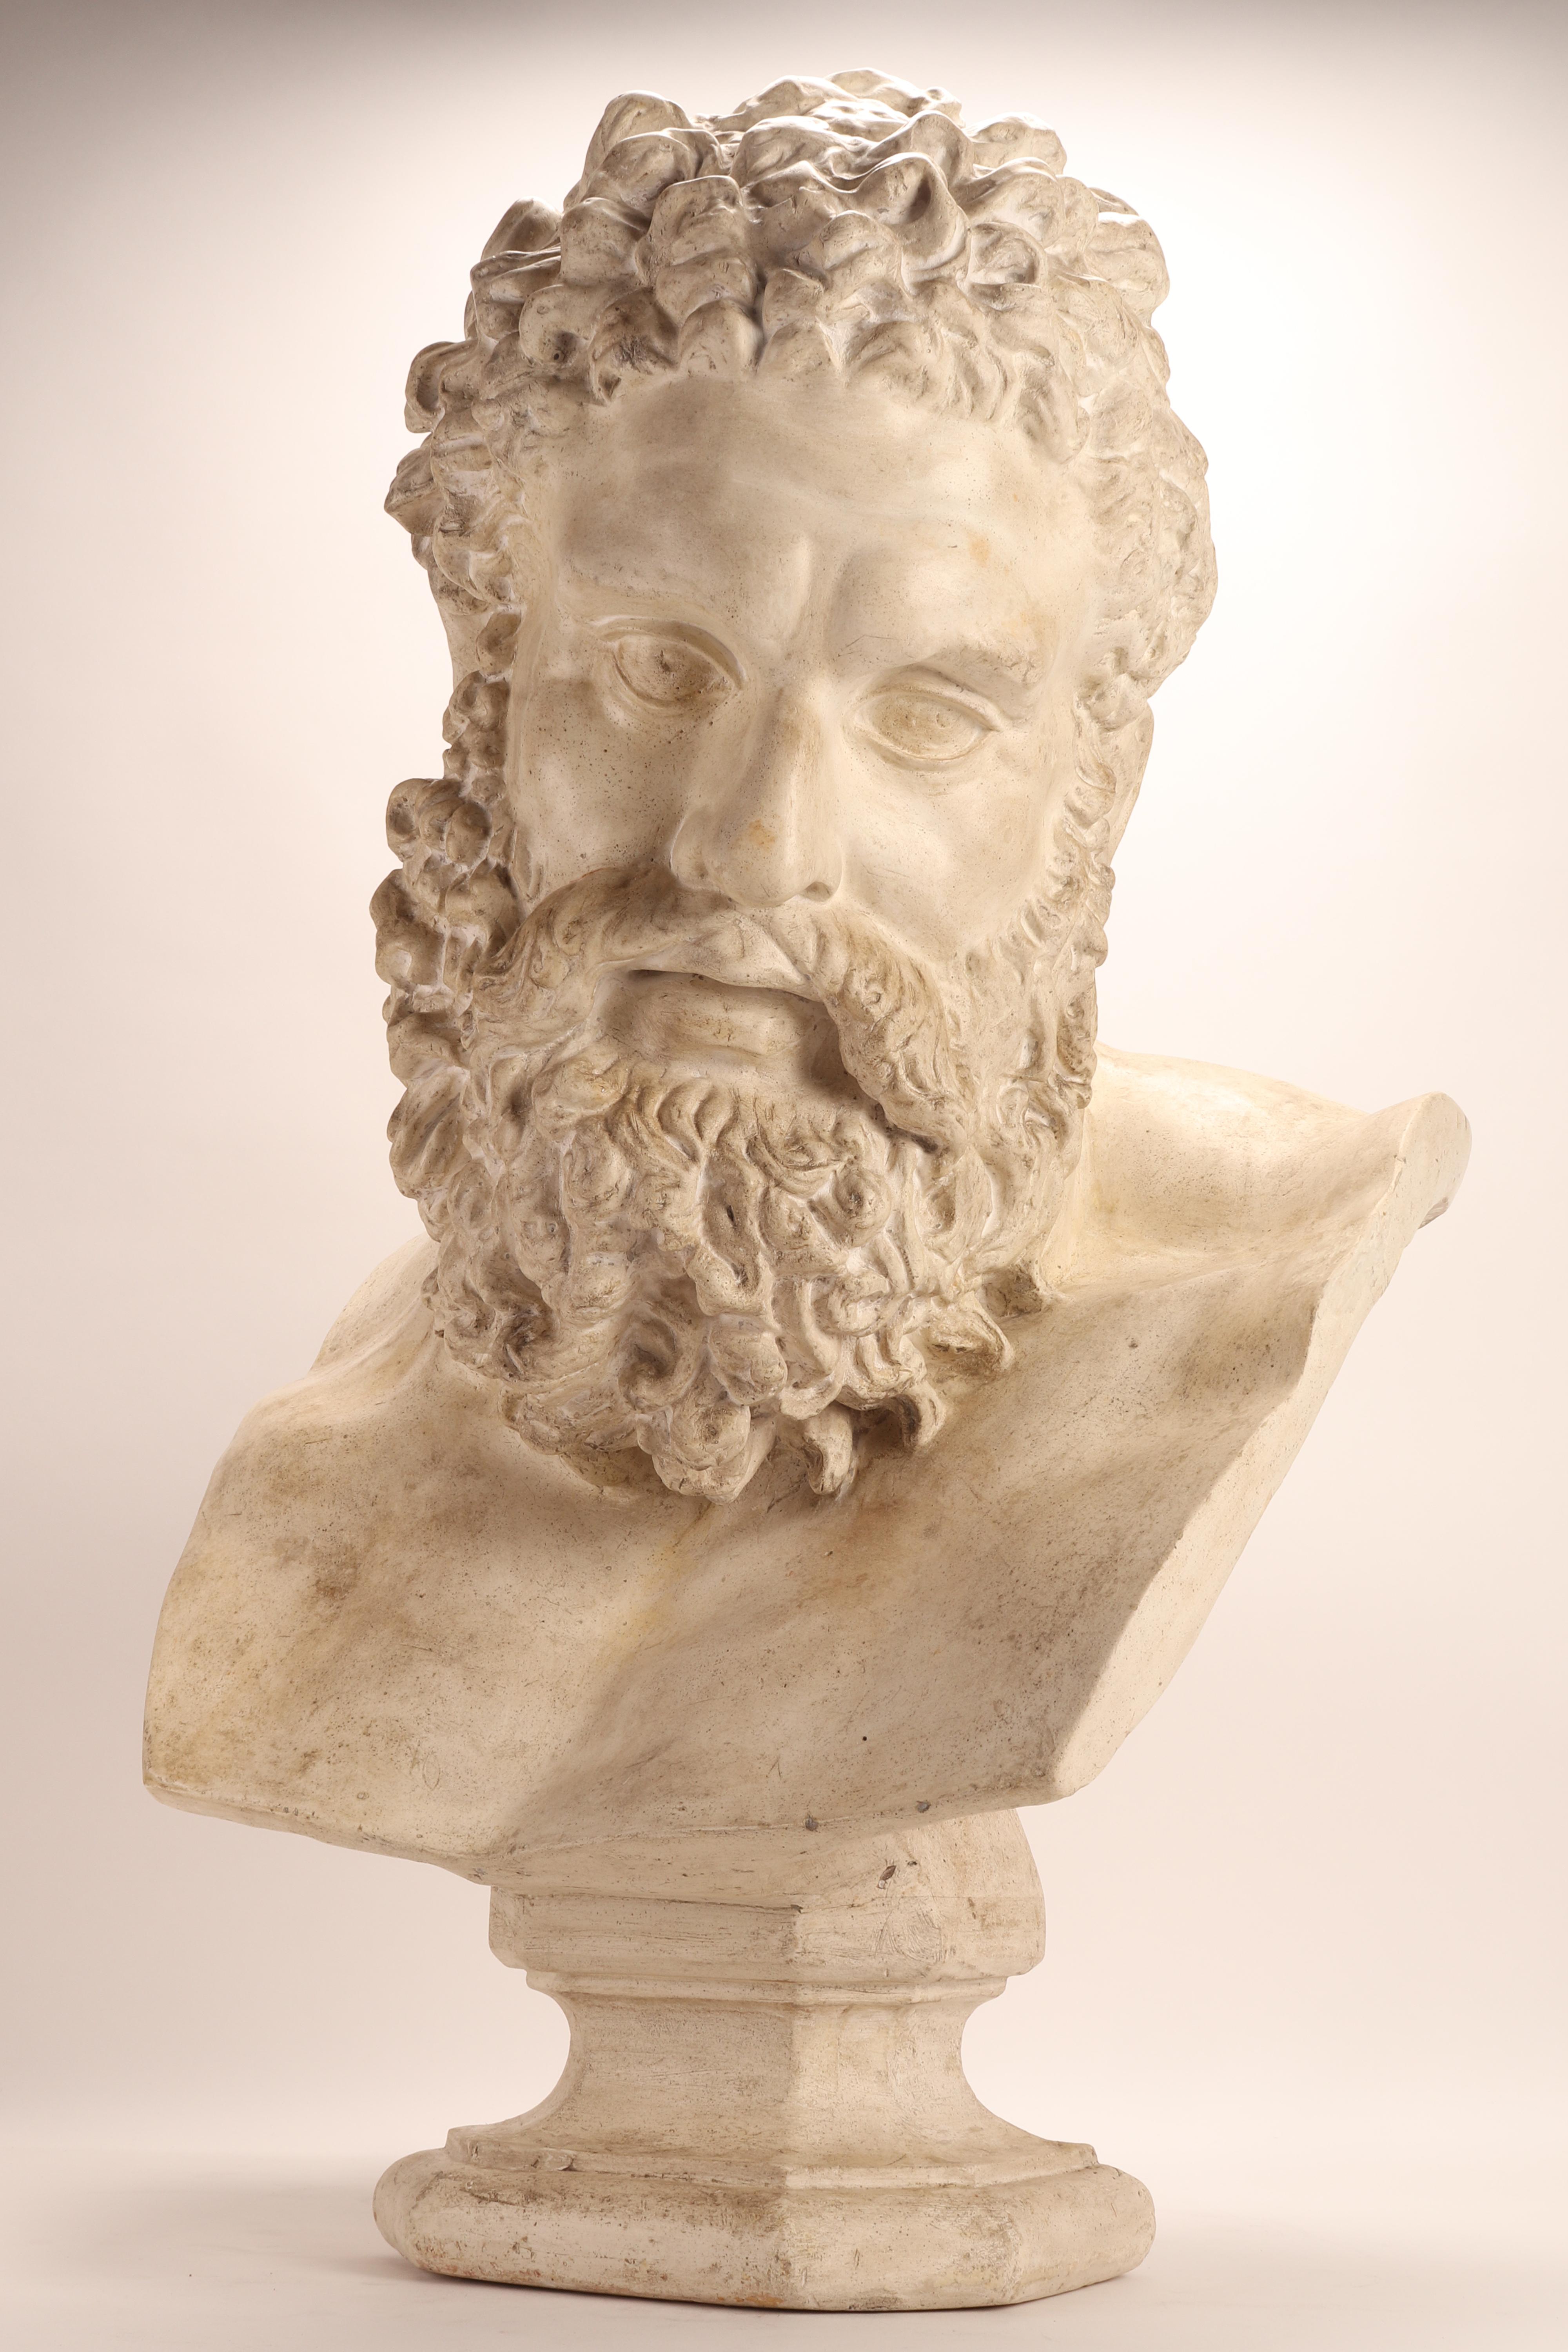 19th Century Academic Cast Depicting the Head of Farnese Hercules, Italy 1880